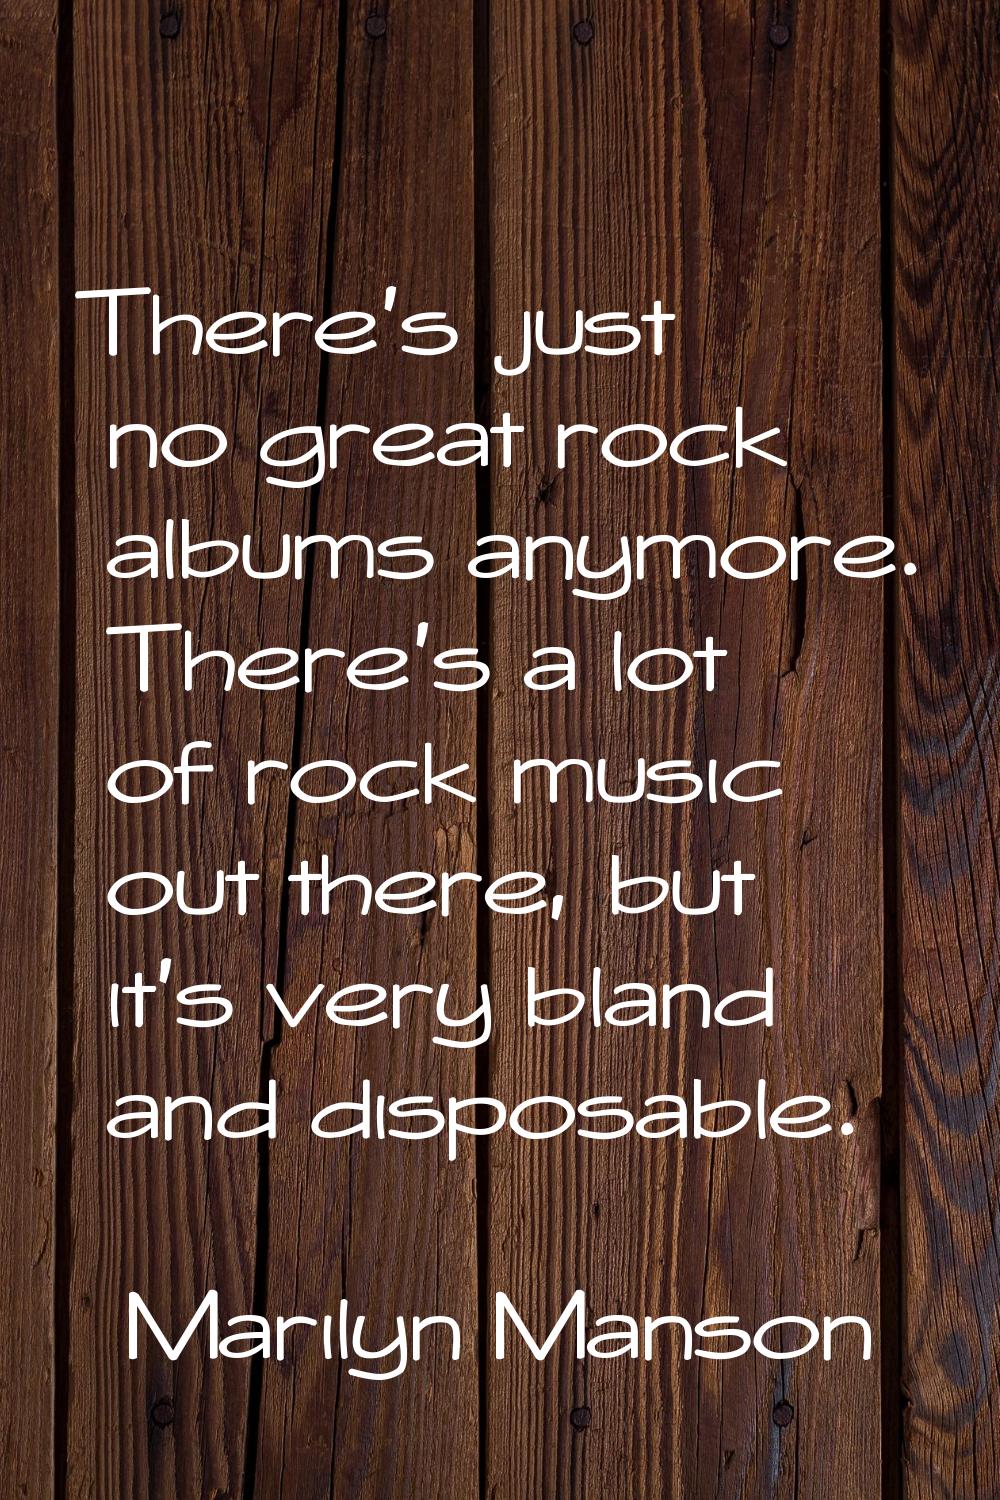 There's just no great rock albums anymore. There's a lot of rock music out there, but it's very bla